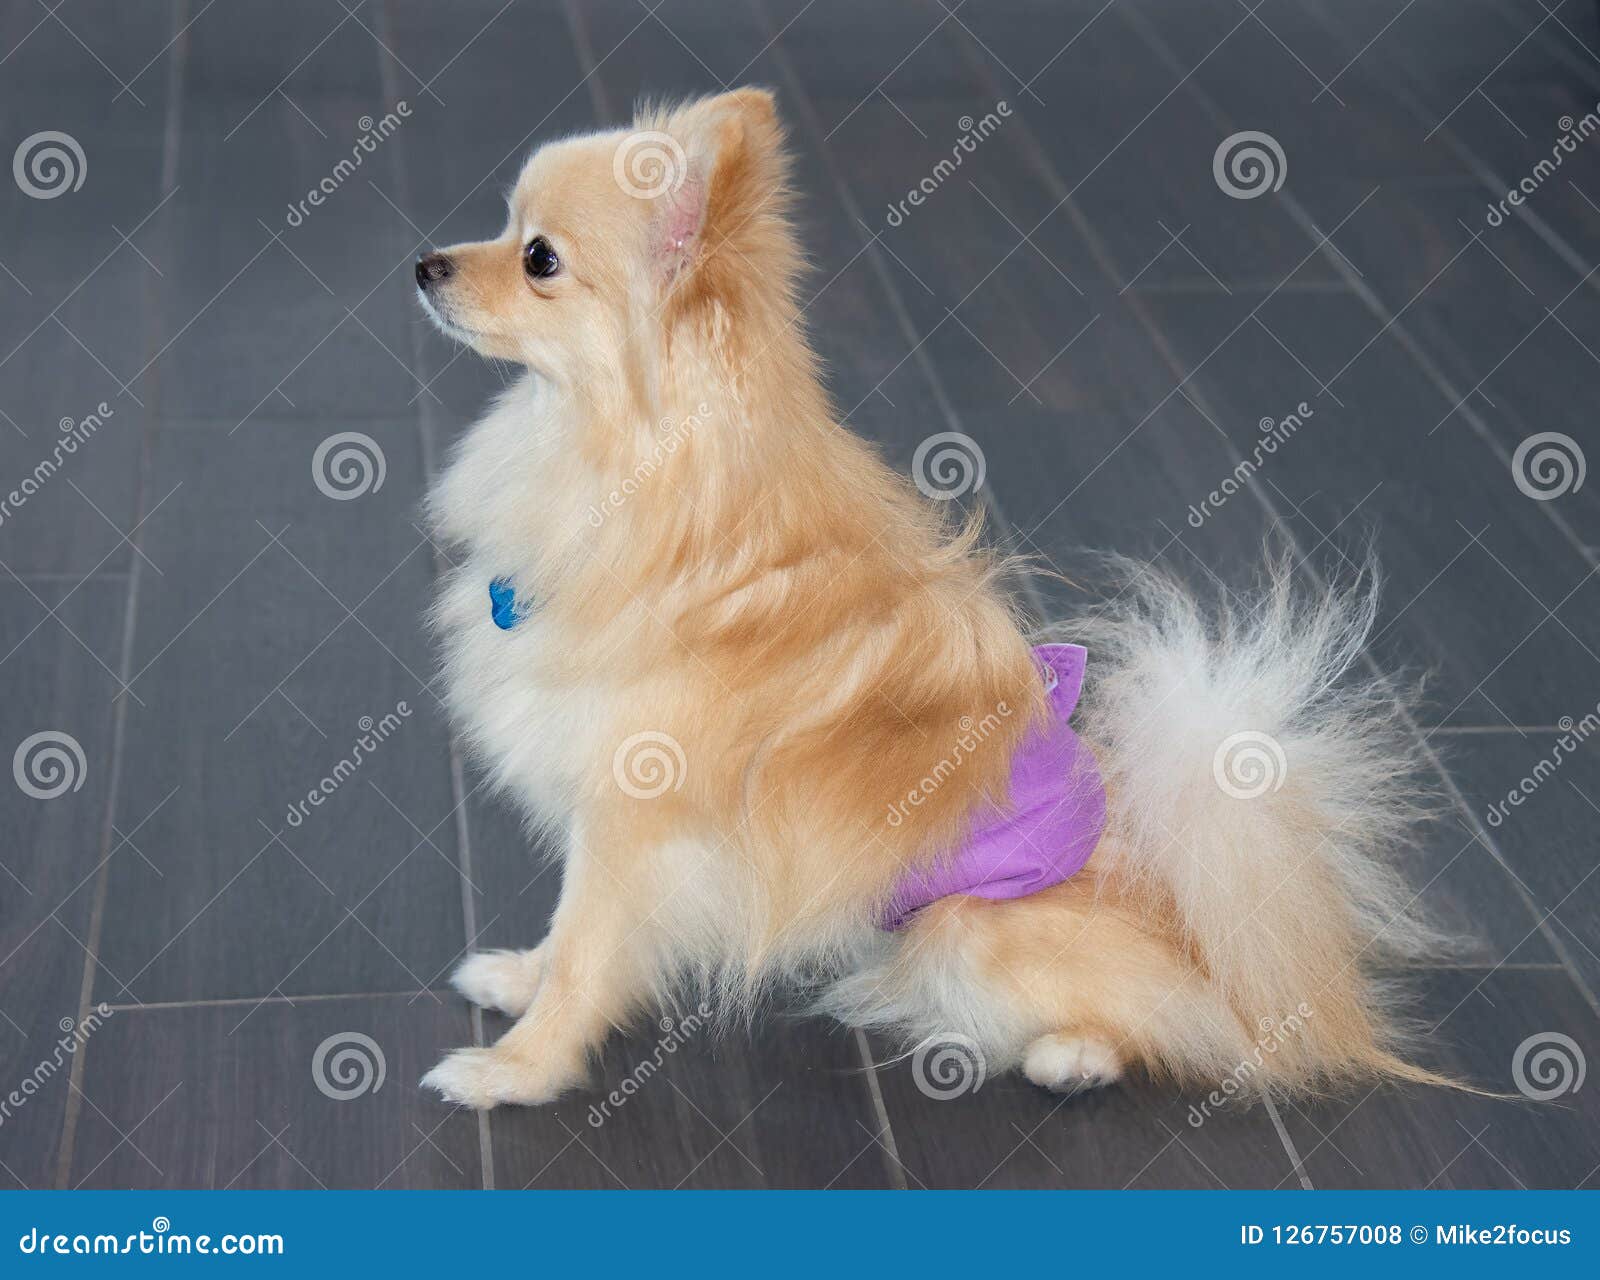 Pomeranian Dog In Pee Diaper To Keep Him From Urinating On The